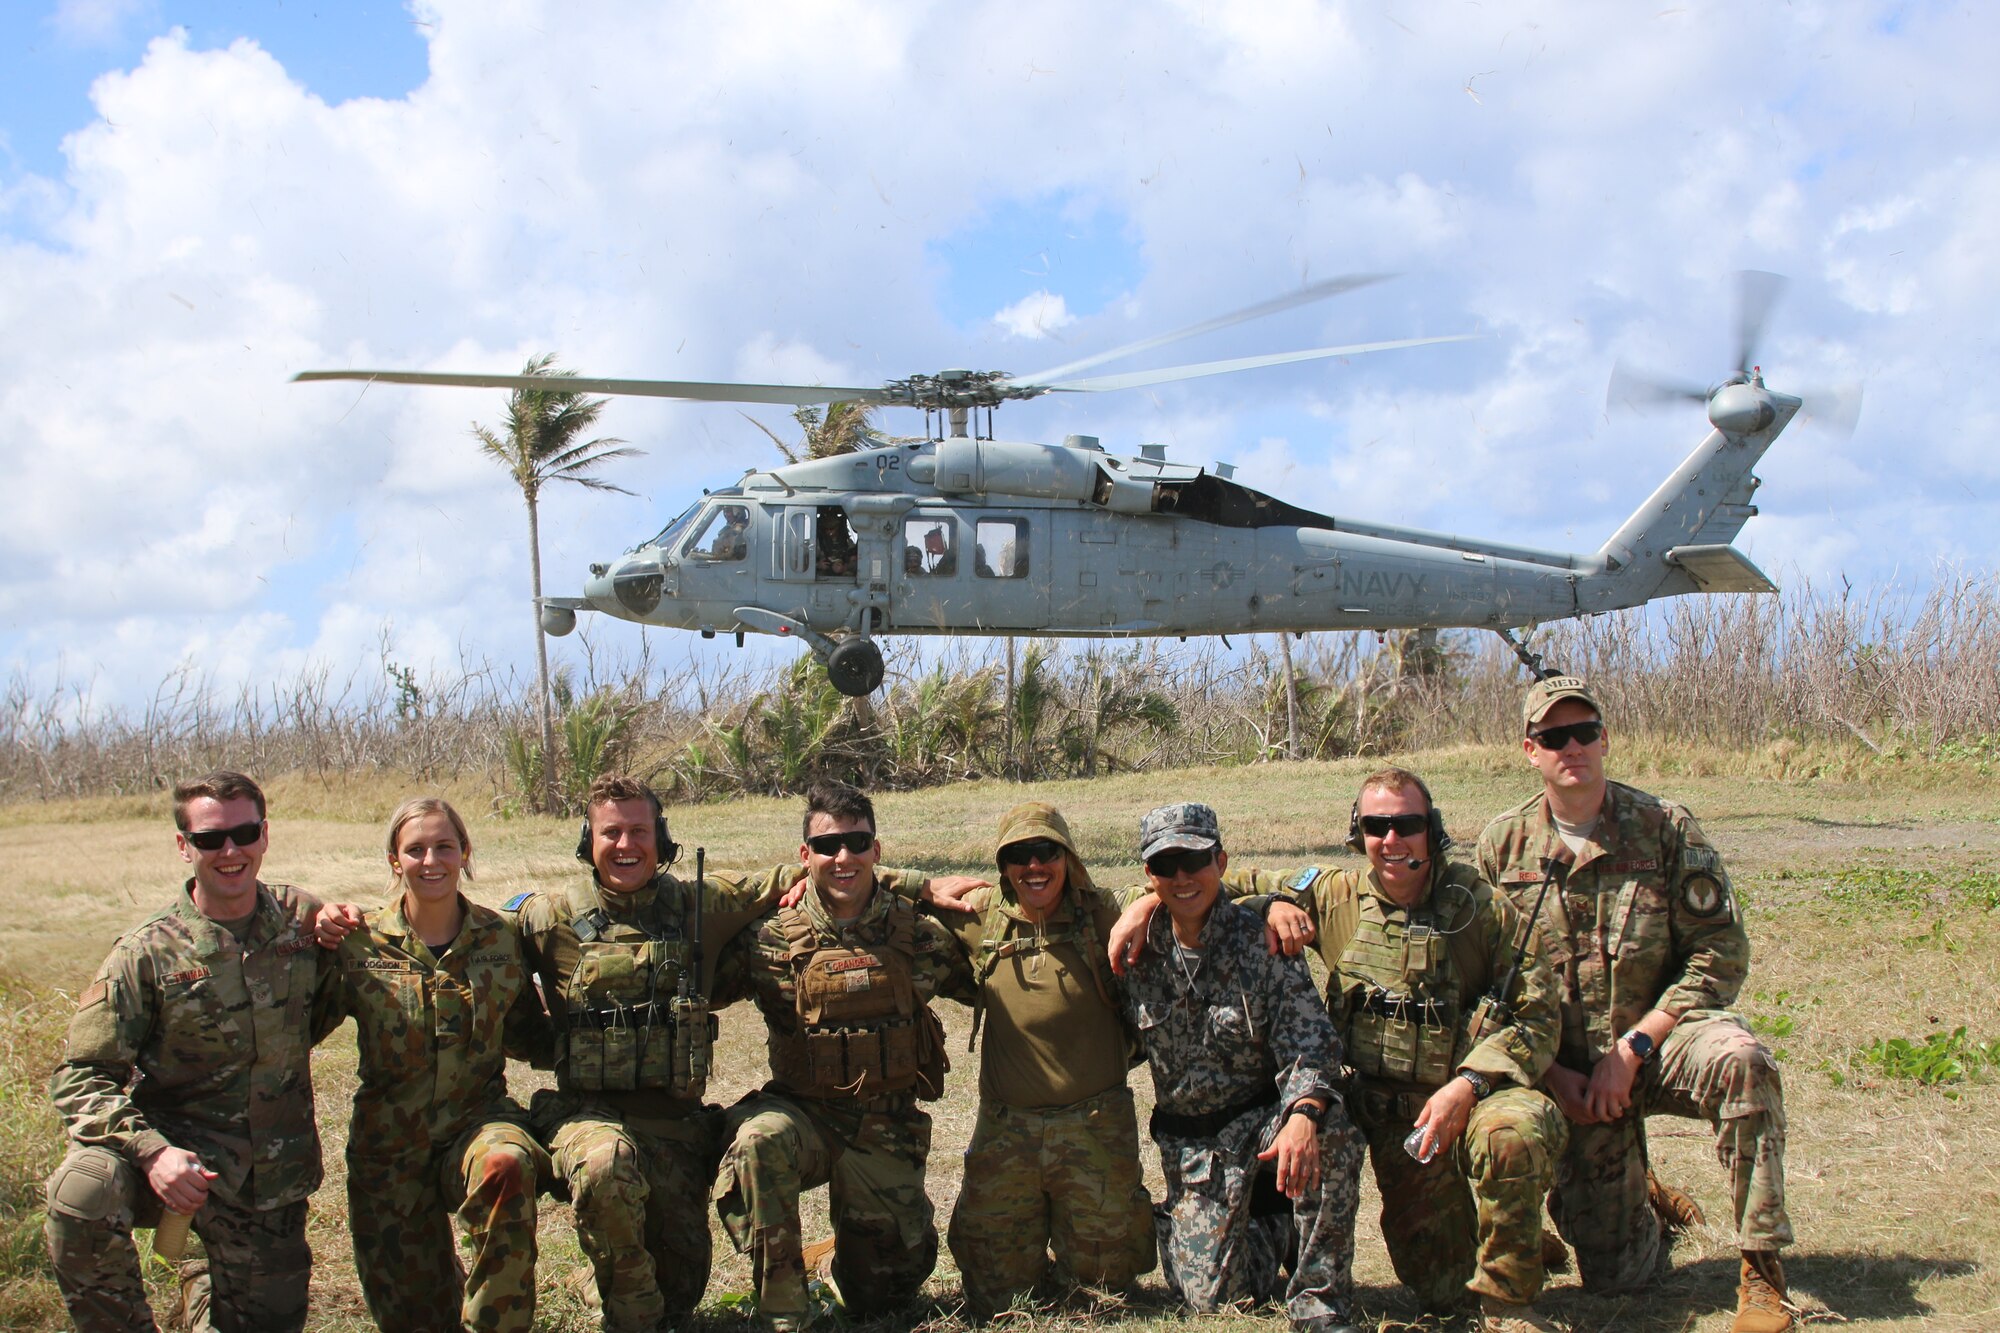 Service members from the United States, Royal Australian Air Force, and the Japan Air Self-Defense Force pose for a photo after an aeromedical evacuation exercise during Cope North 2019 Feb. 27, 2019, at Tinian, Commonwealth of the Northern Marianas. Service members from the U.S., Royal Australian Air Force, and the Japan Air Self-Defense Force exercised their Humanitarian Assistance and Disaster Relief skills together on Tinian by providing emergency medical care and secure transportation for simulated patients. (Courtesy photo)